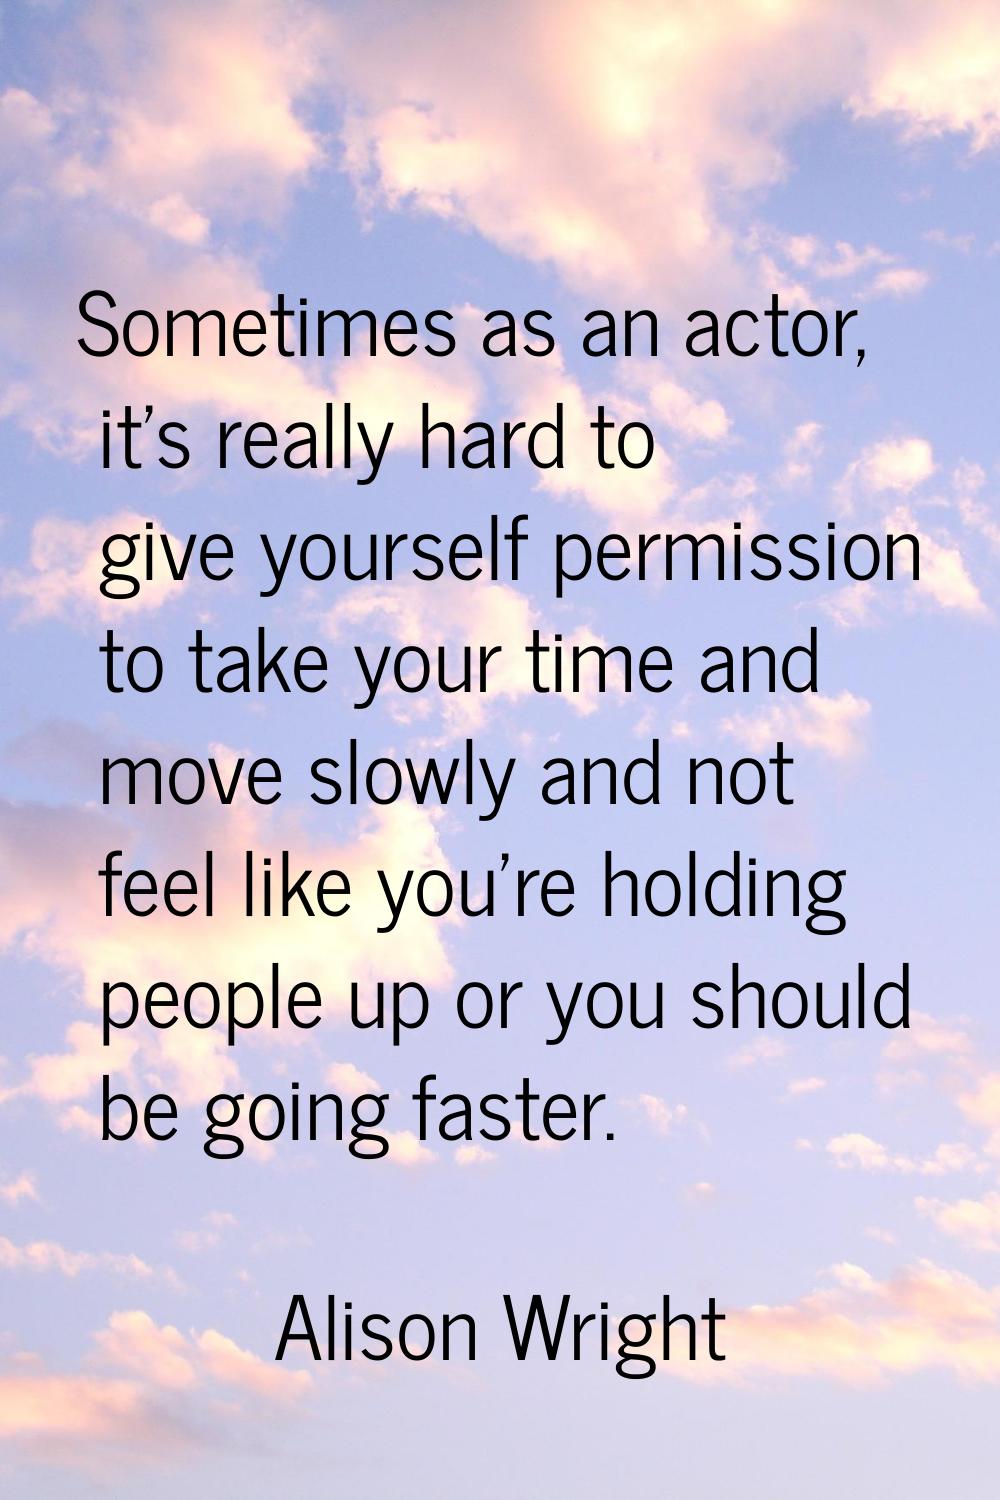 Sometimes as an actor, it's really hard to give yourself permission to take your time and move slow